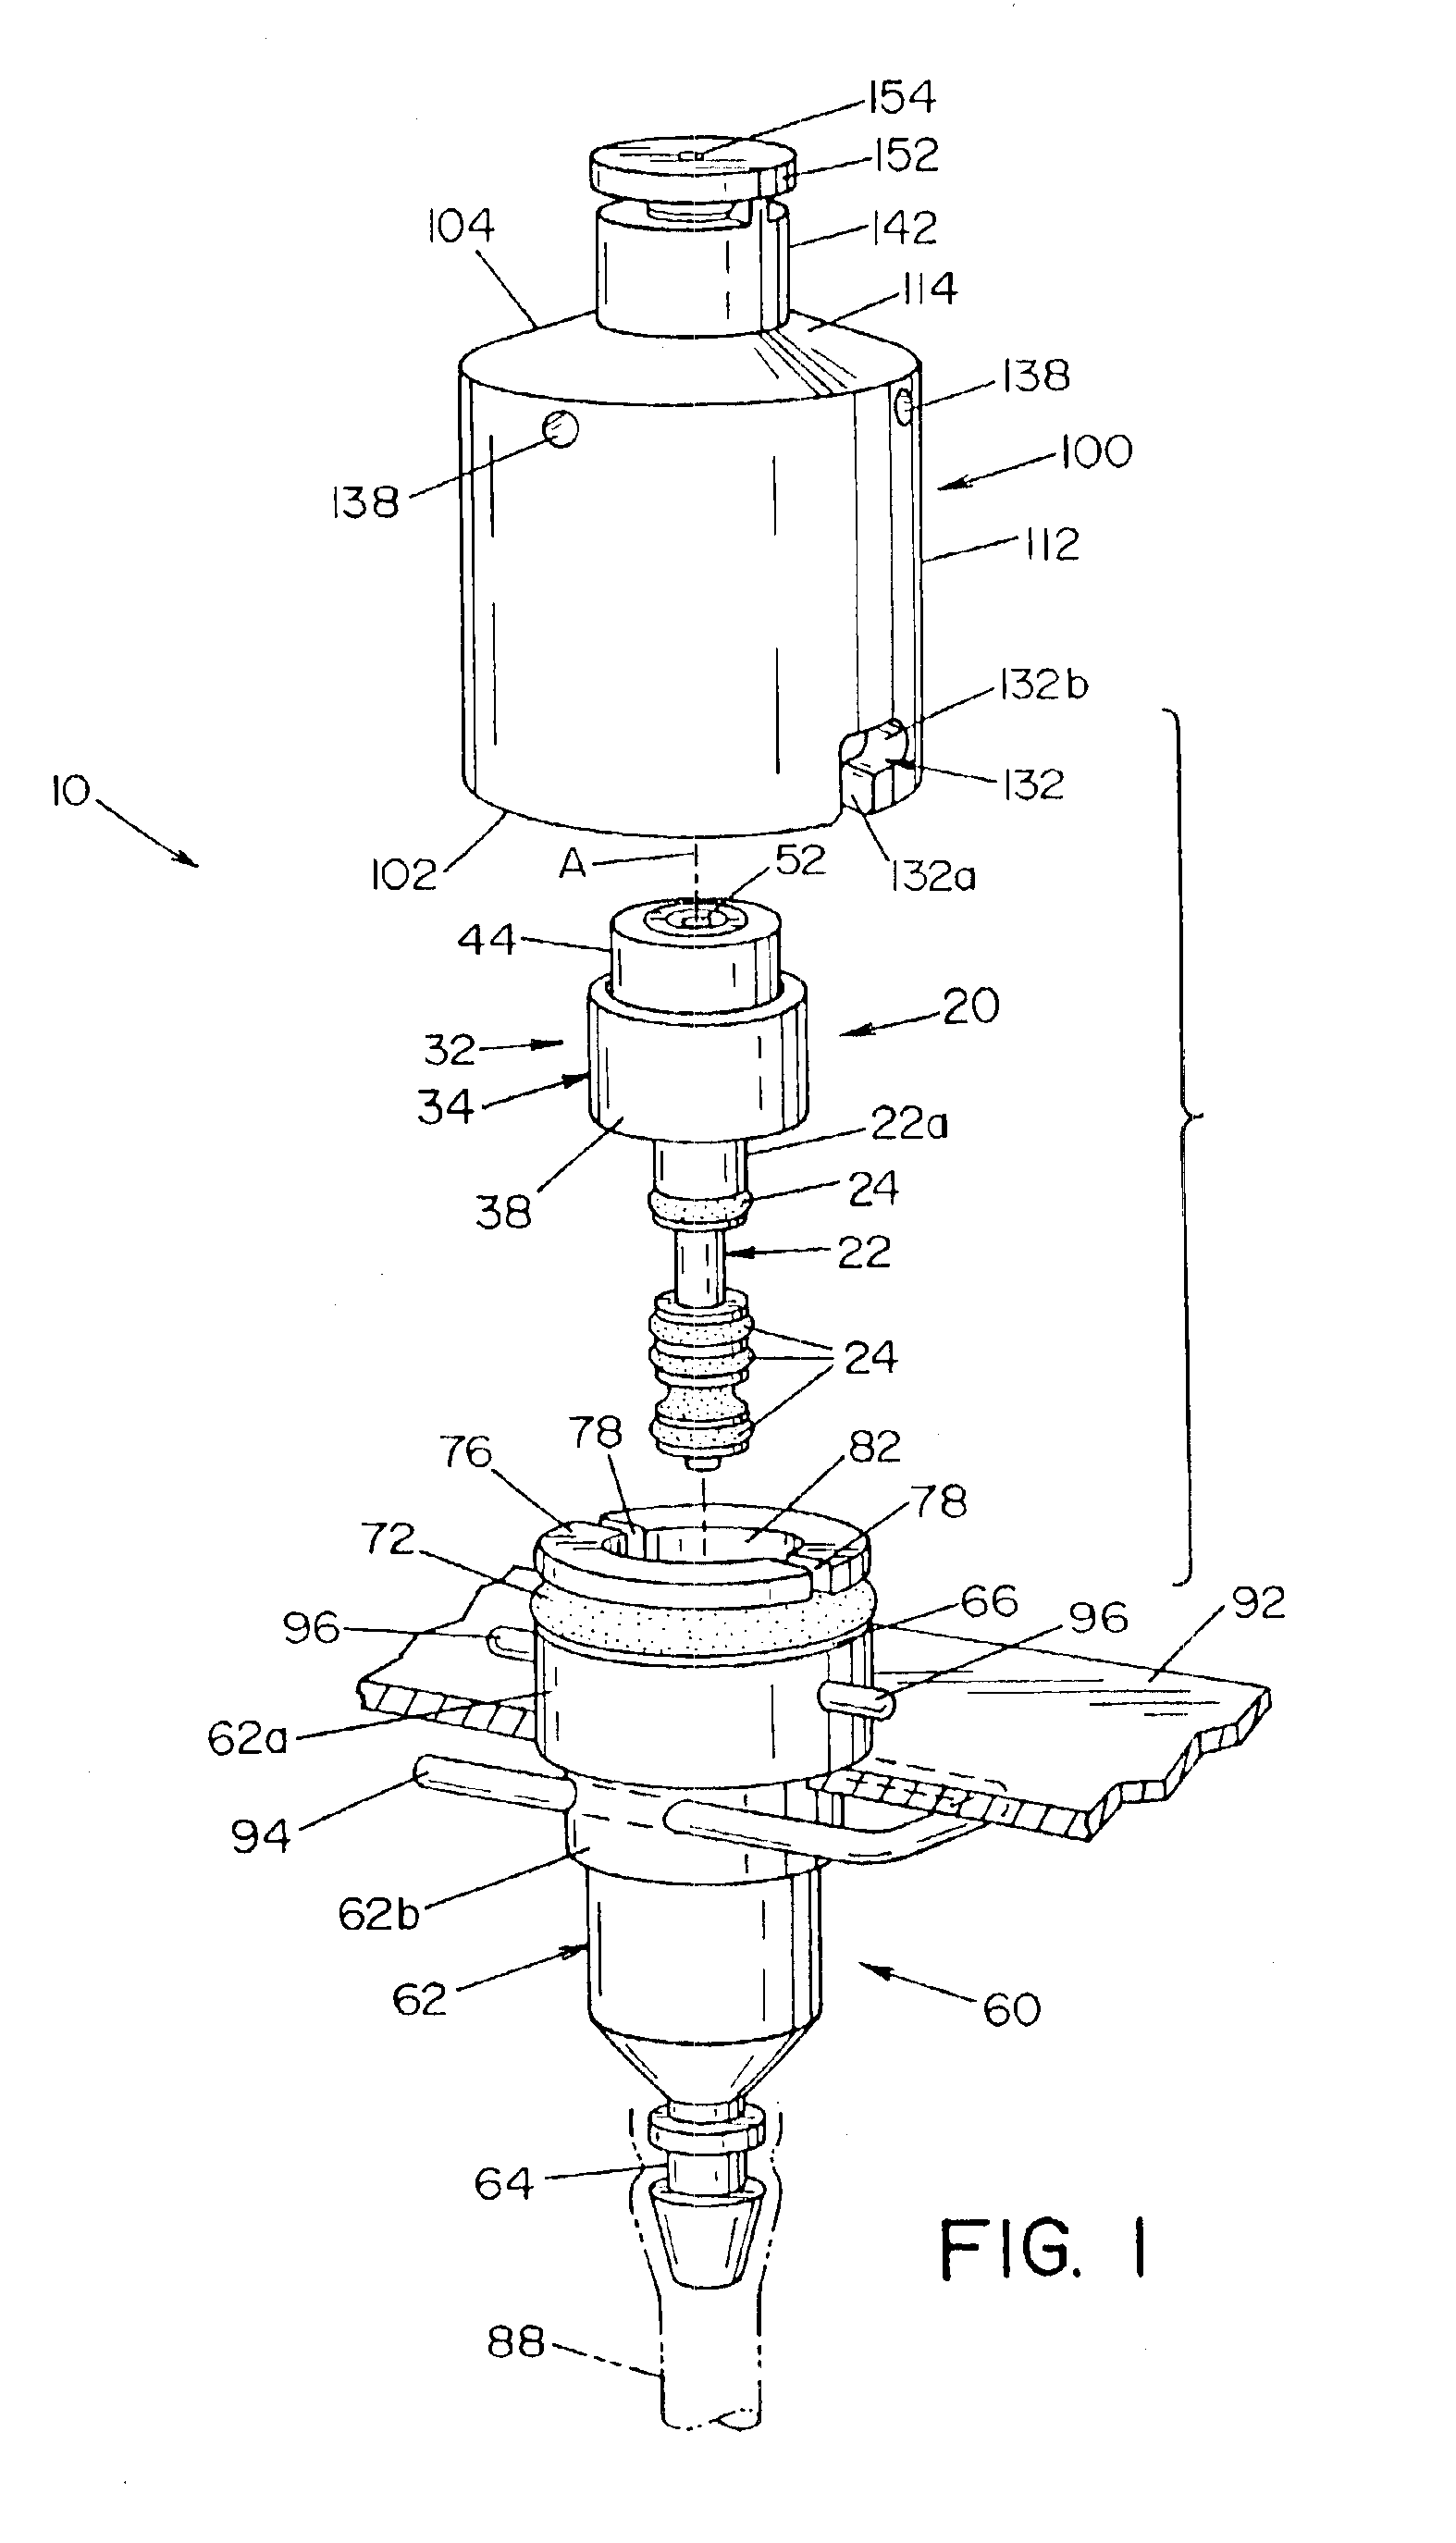 Valve holding fixture for automated reprocessor